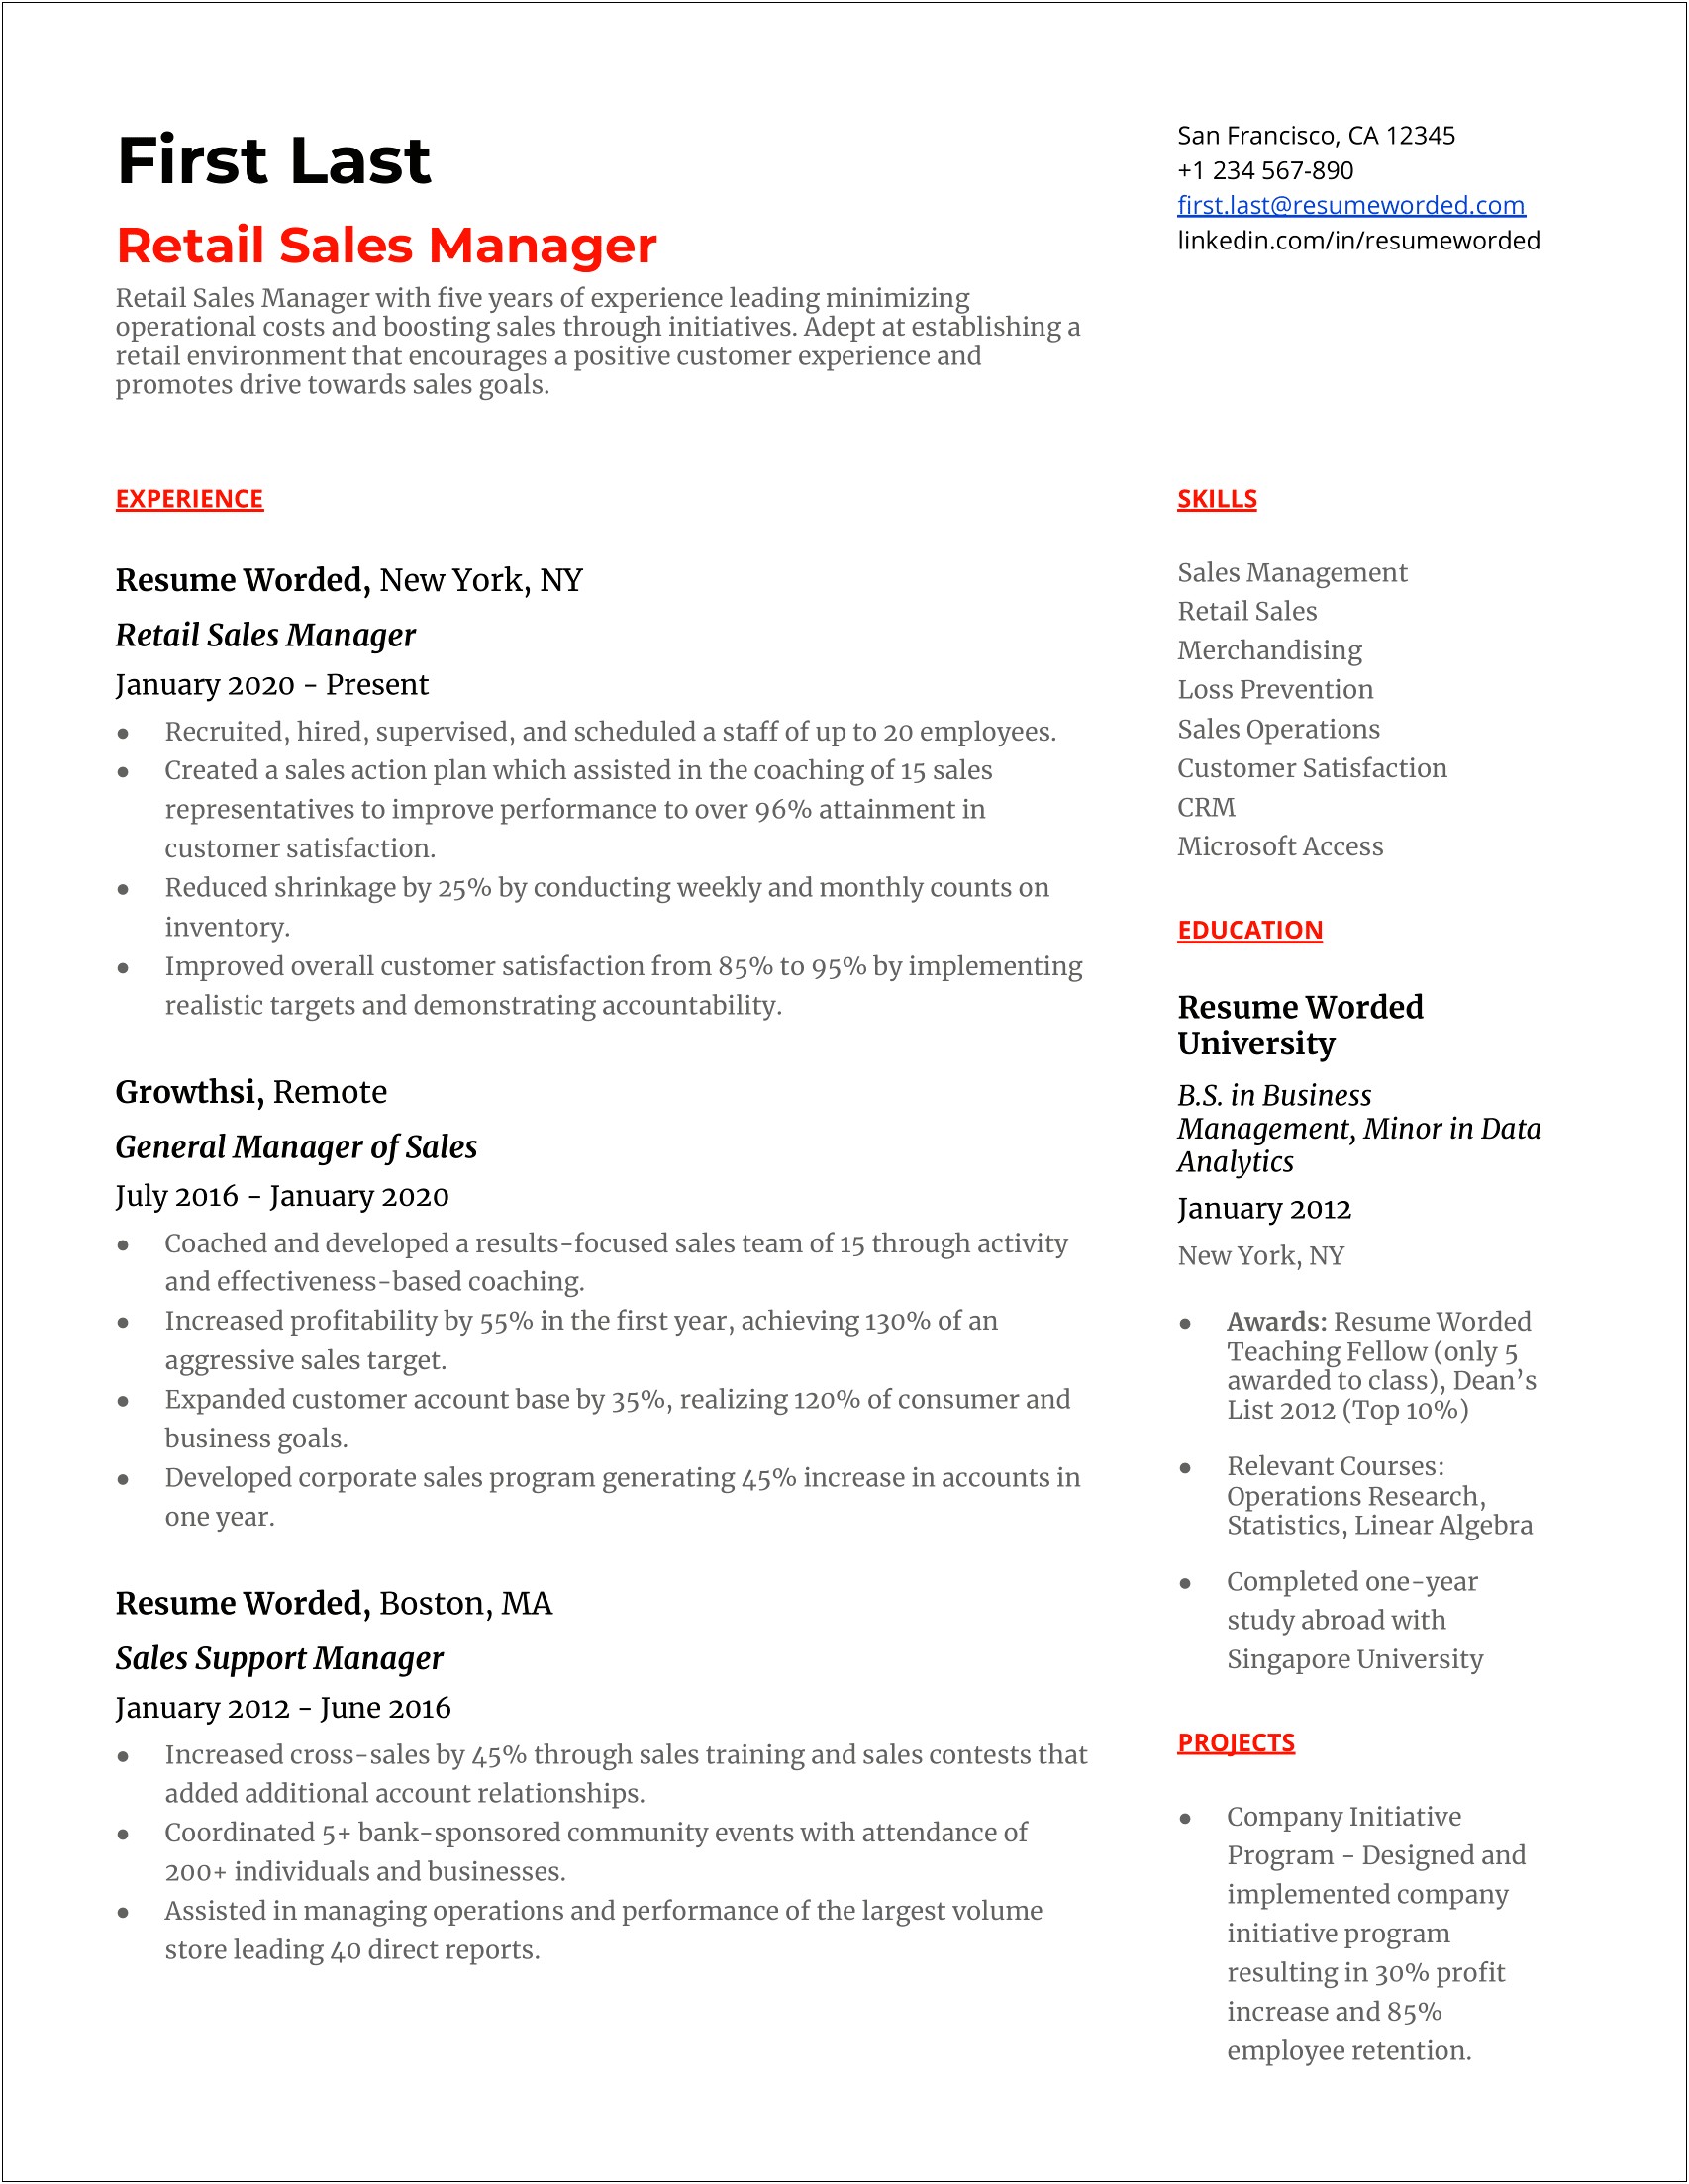 Resume 5 Years Experience Retail Store Experience